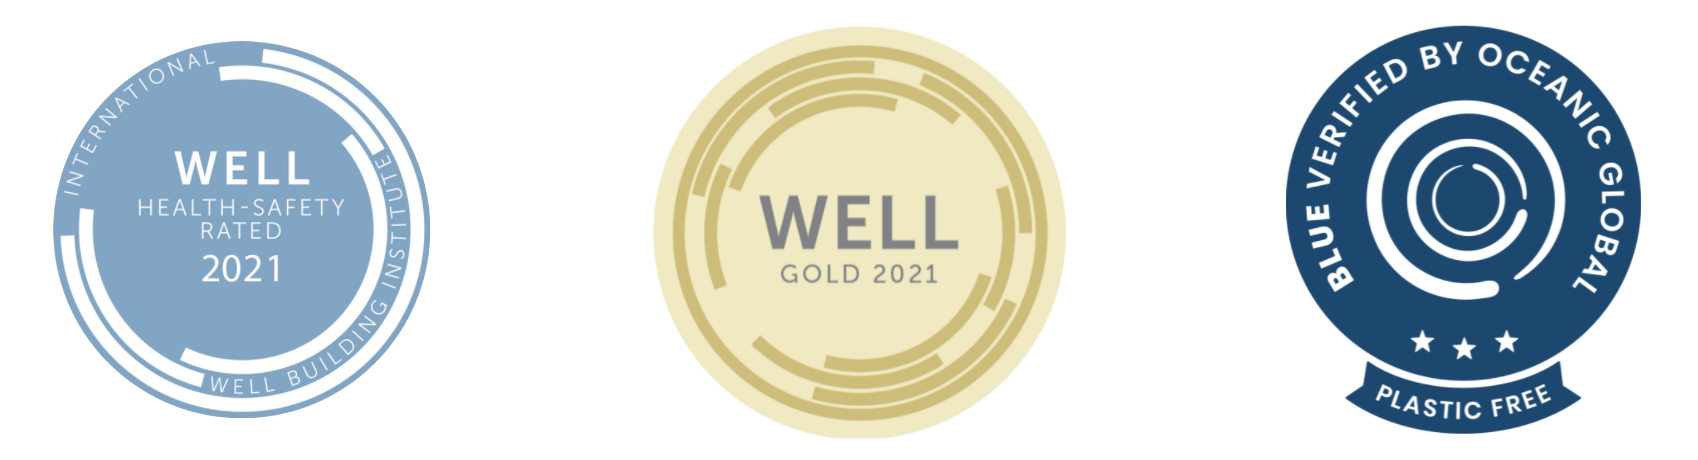 Watson's seals for WELL gold, WELL healthy safety rated, and 3-Star Seal with Oceanic Global's Blue Standard